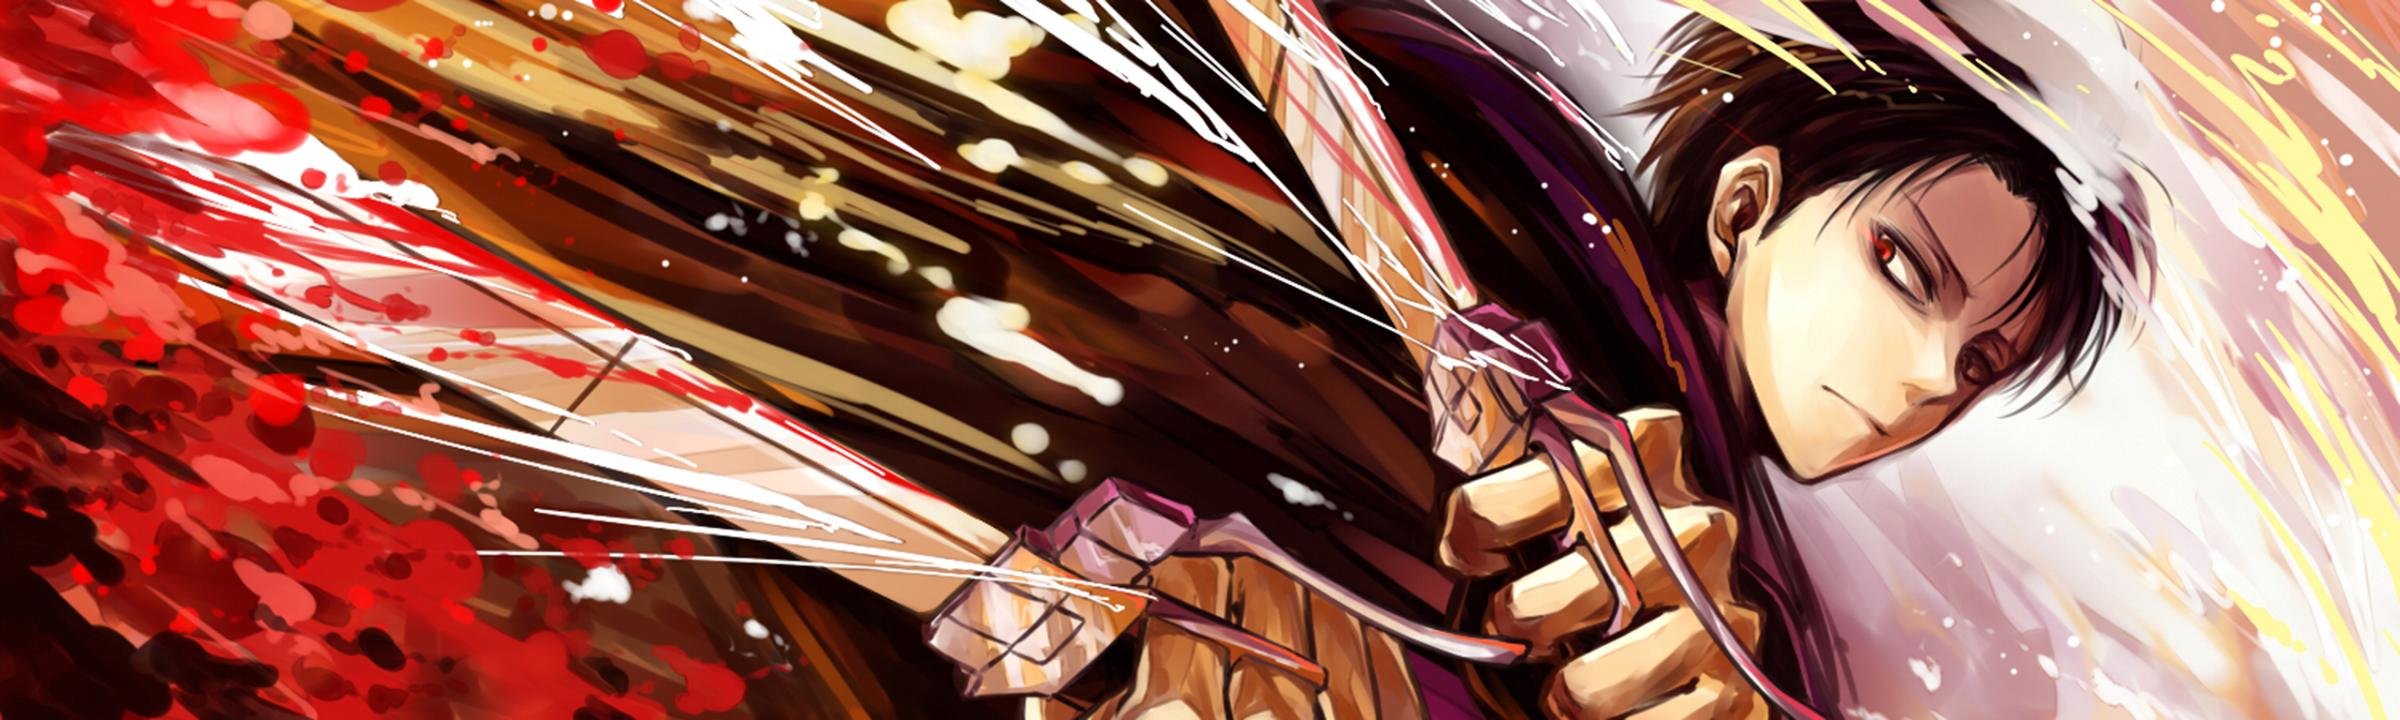 Download dual monitor 2400x720 Levi Ackerman PC background ID:206284 for free